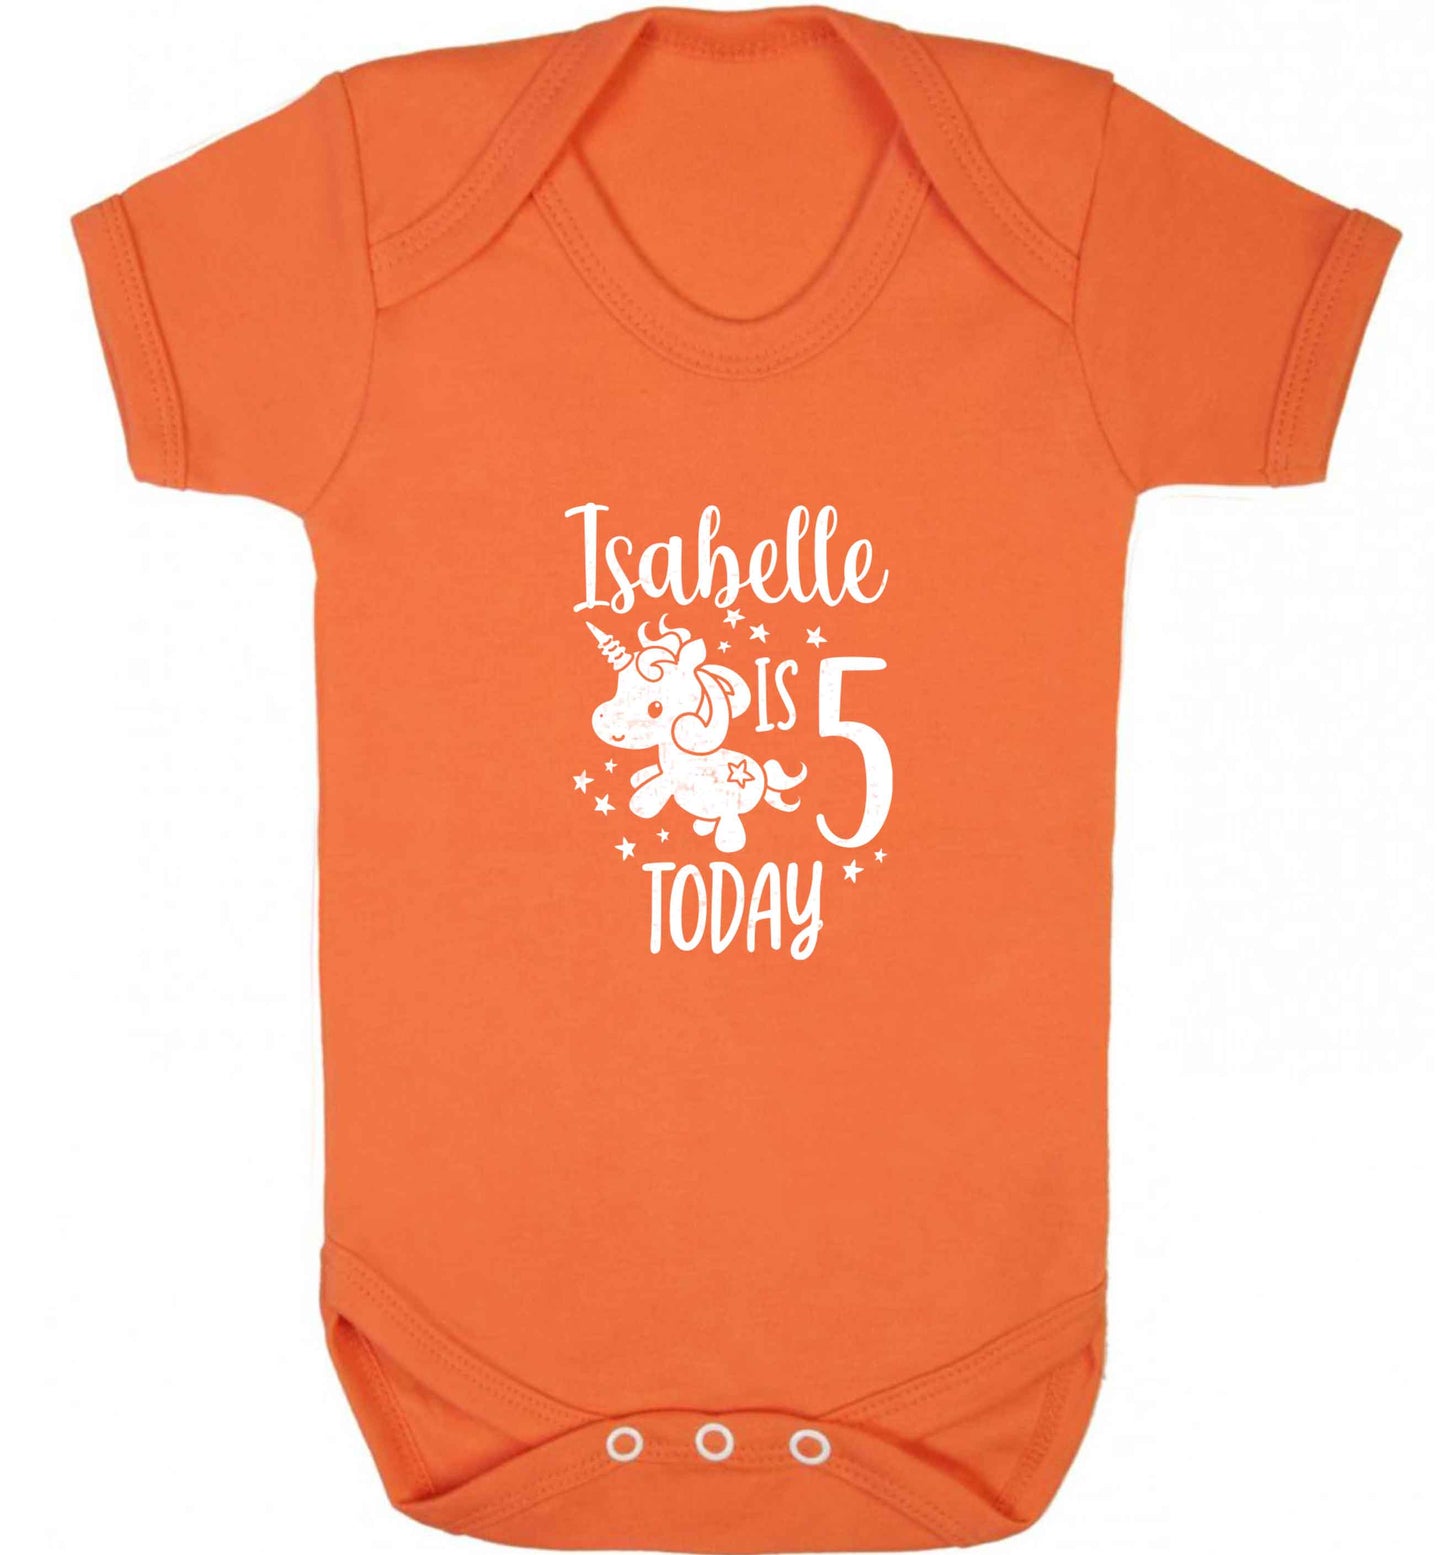 Today I am - Personalise with any name or age! Birthday unicorn baby vest orange 18-24 months